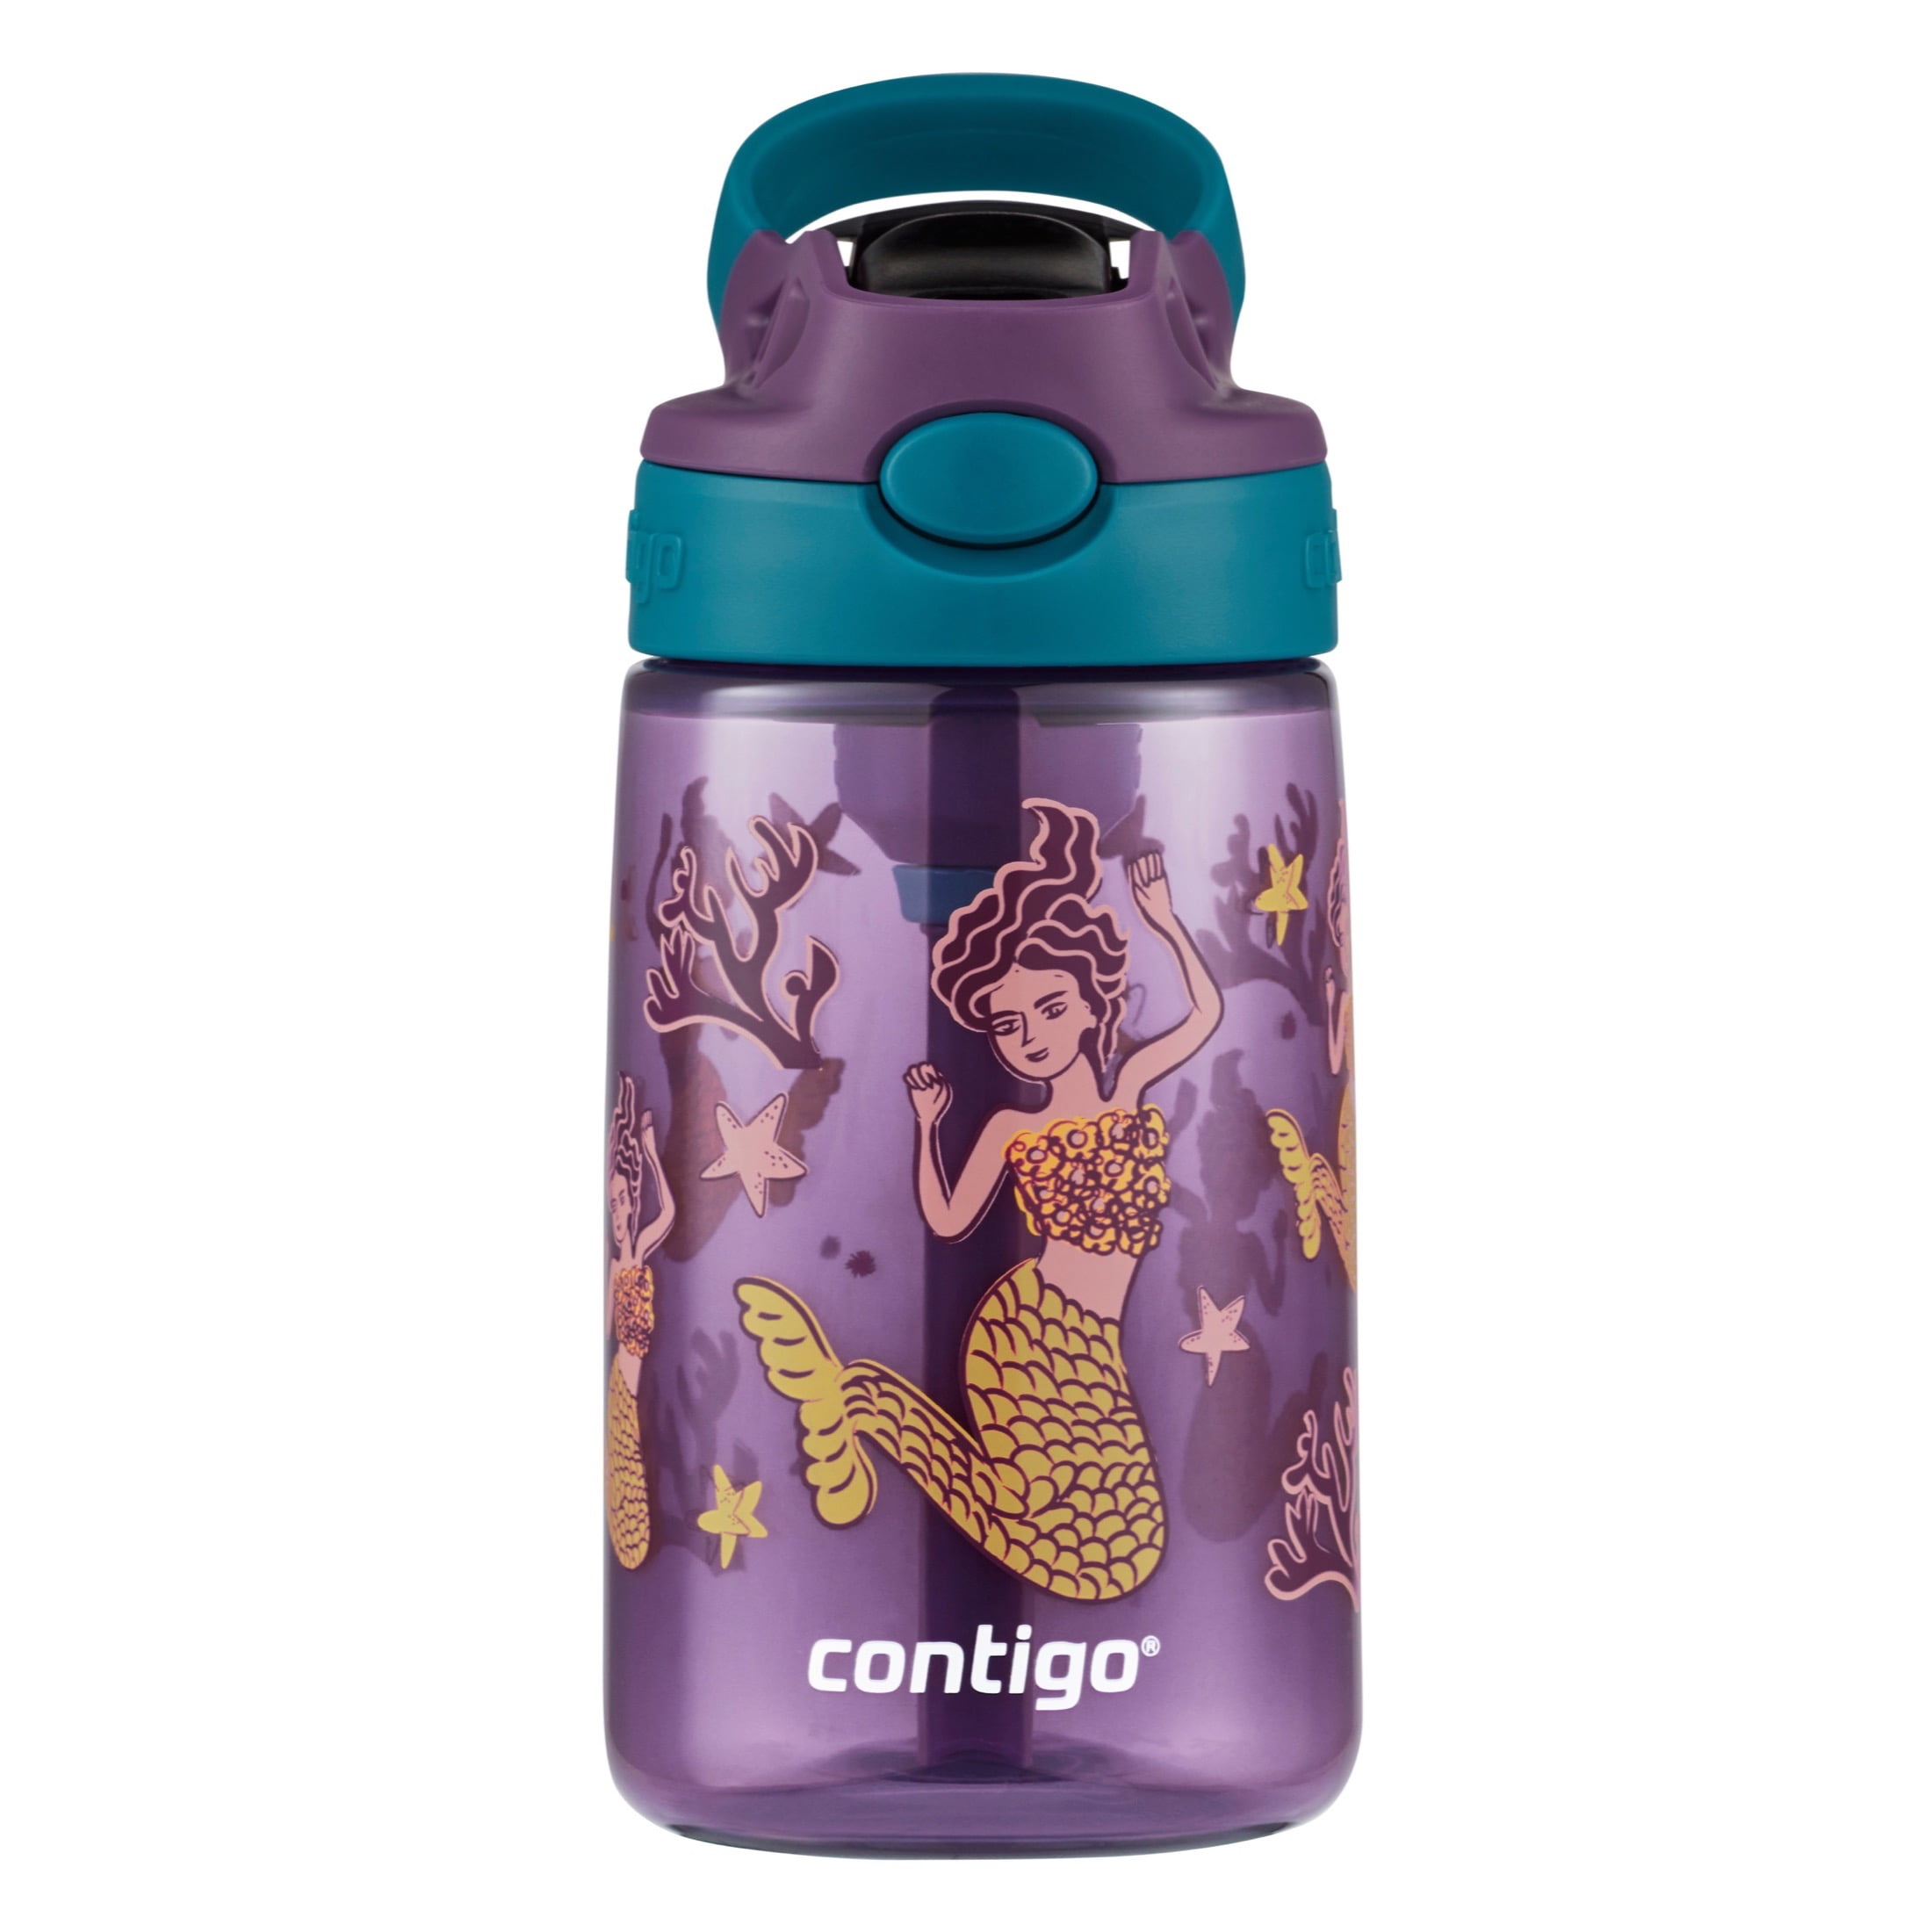  Contigo Aubrey Kids Cleanable Water Bottle with Silicone Straw  and Spill-Proof Lid, Dishwasher Safe, 20oz, Blueberry/Green Apple : Sports  & Outdoors